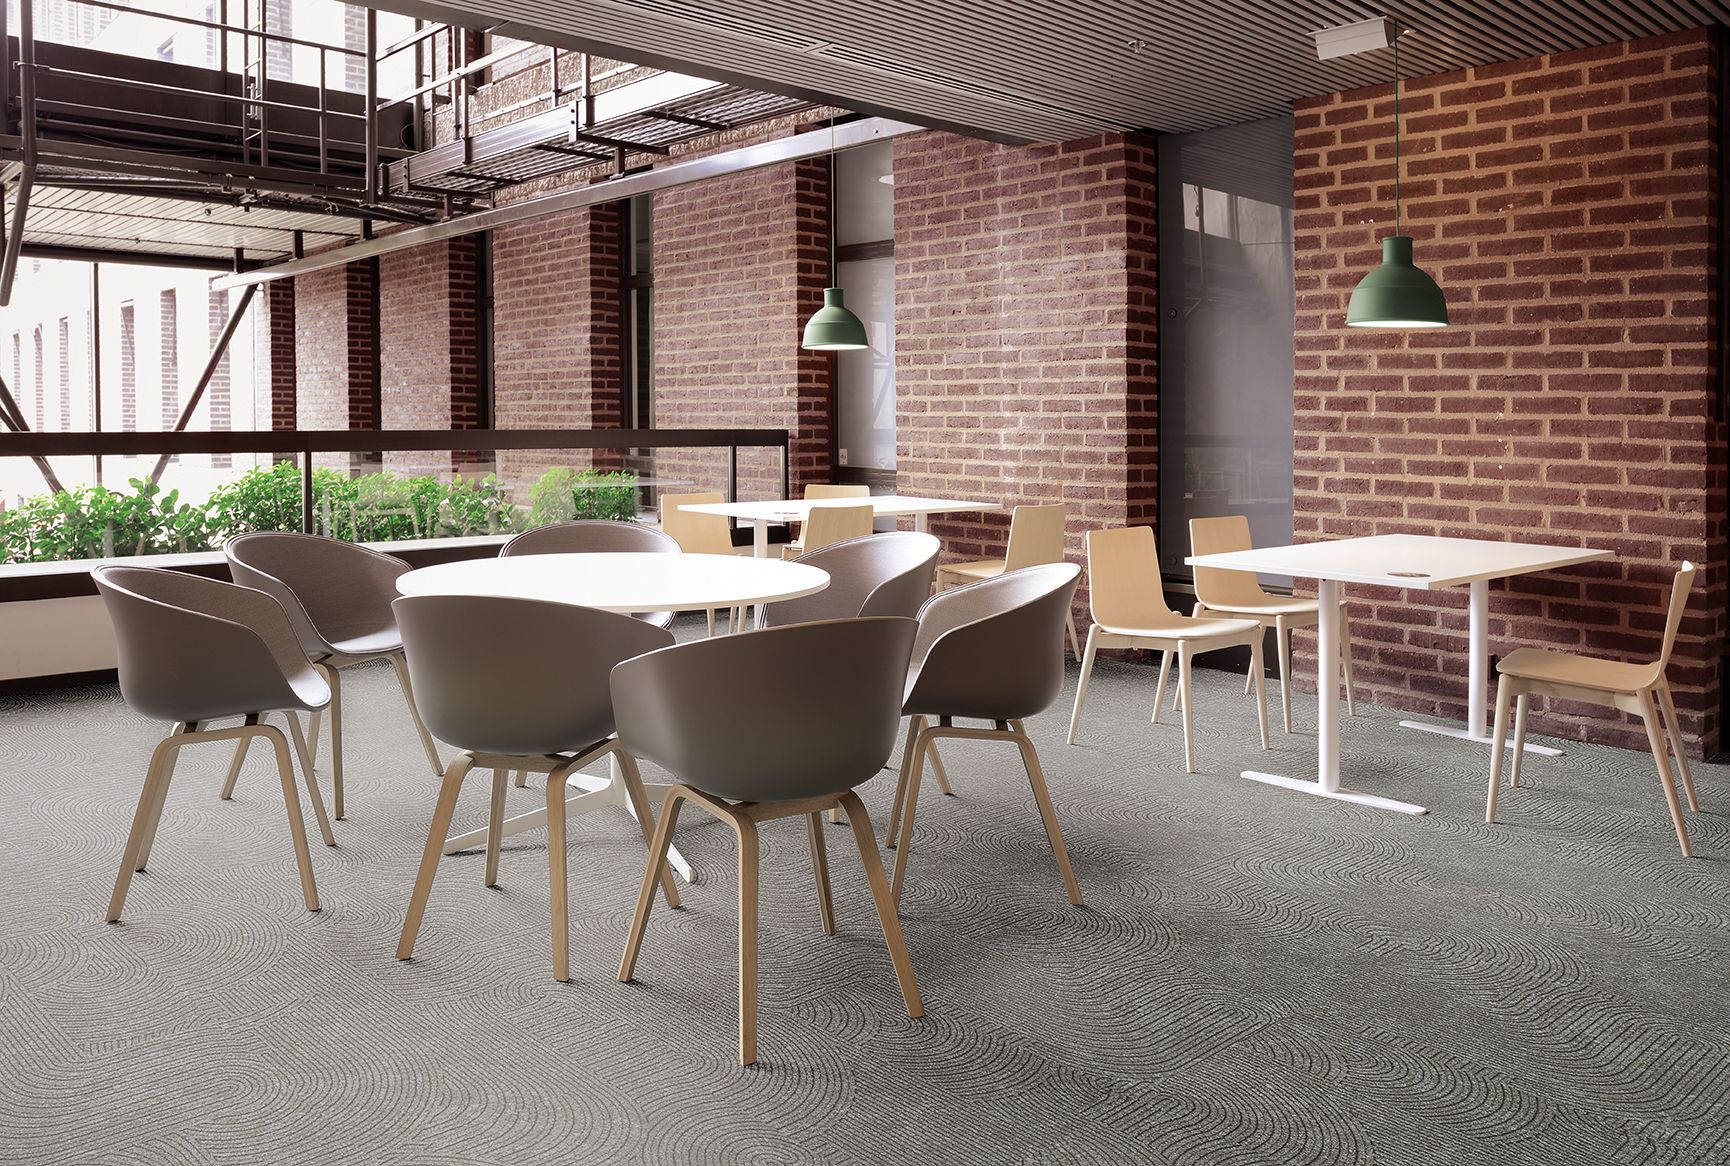 Interface Walk About LVT in building common area with table and chairs imagen número 8